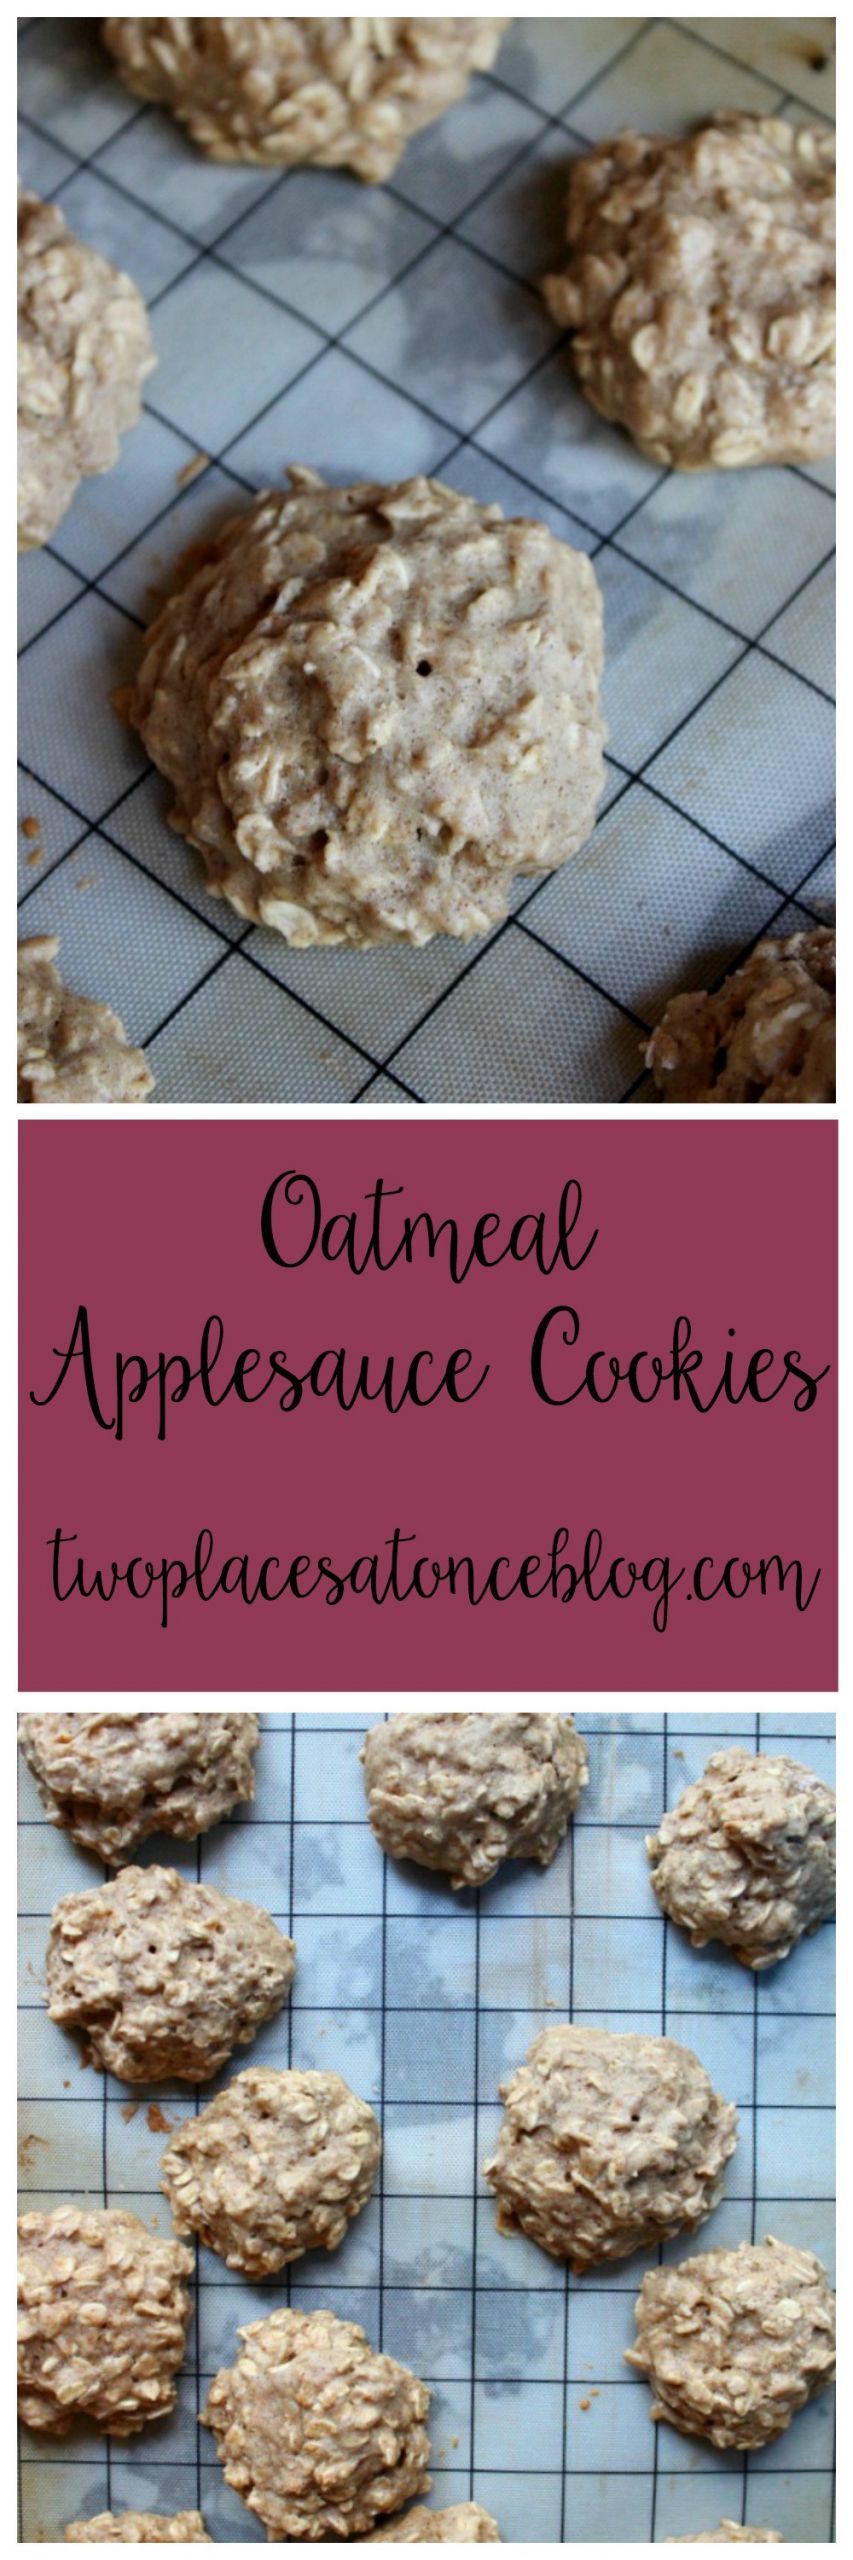 Oatmeal Cookies For Two
 Oatmeal Applesauce Cookies